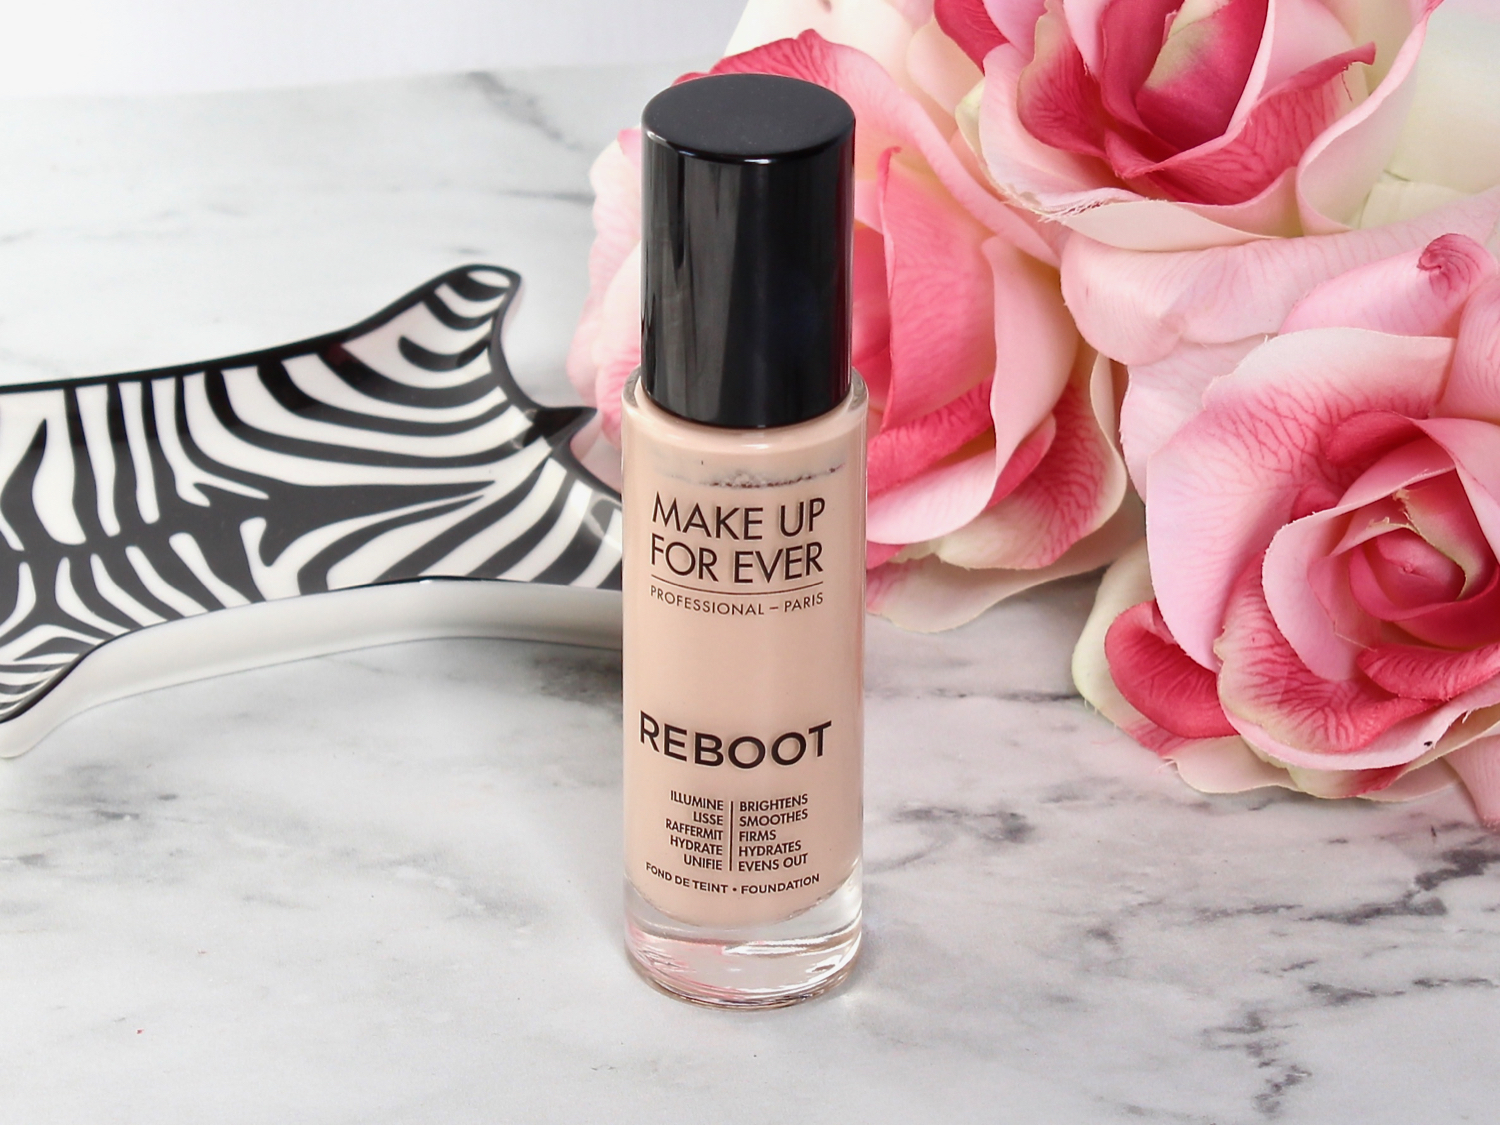 MAKE UP FOR EVER REBOOT Foundation Review and Swatches